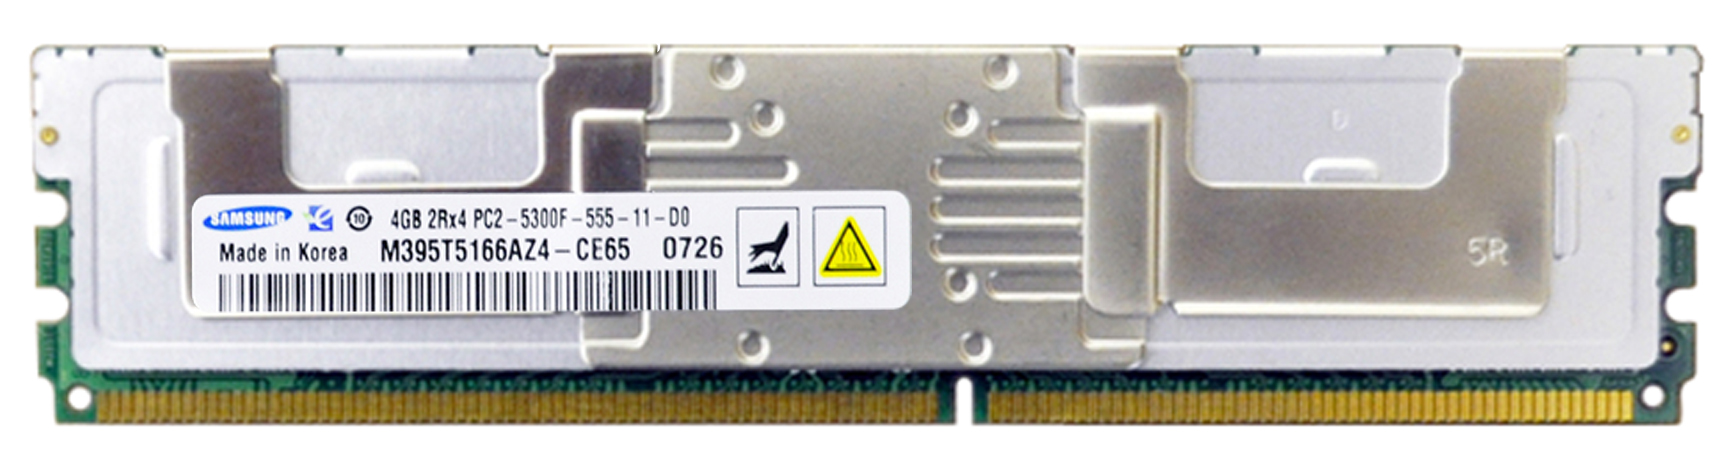 3DDLA1534817 3D Memory 4GB PC2-5300 DDR2-667MHz ECC Fully Buffered CL5 240-Pin DIMM Memory Module for PowerEdge 1955 P/N (compatible with A1534817, F51272F51, A0763303, 39M5796, 43R1773)